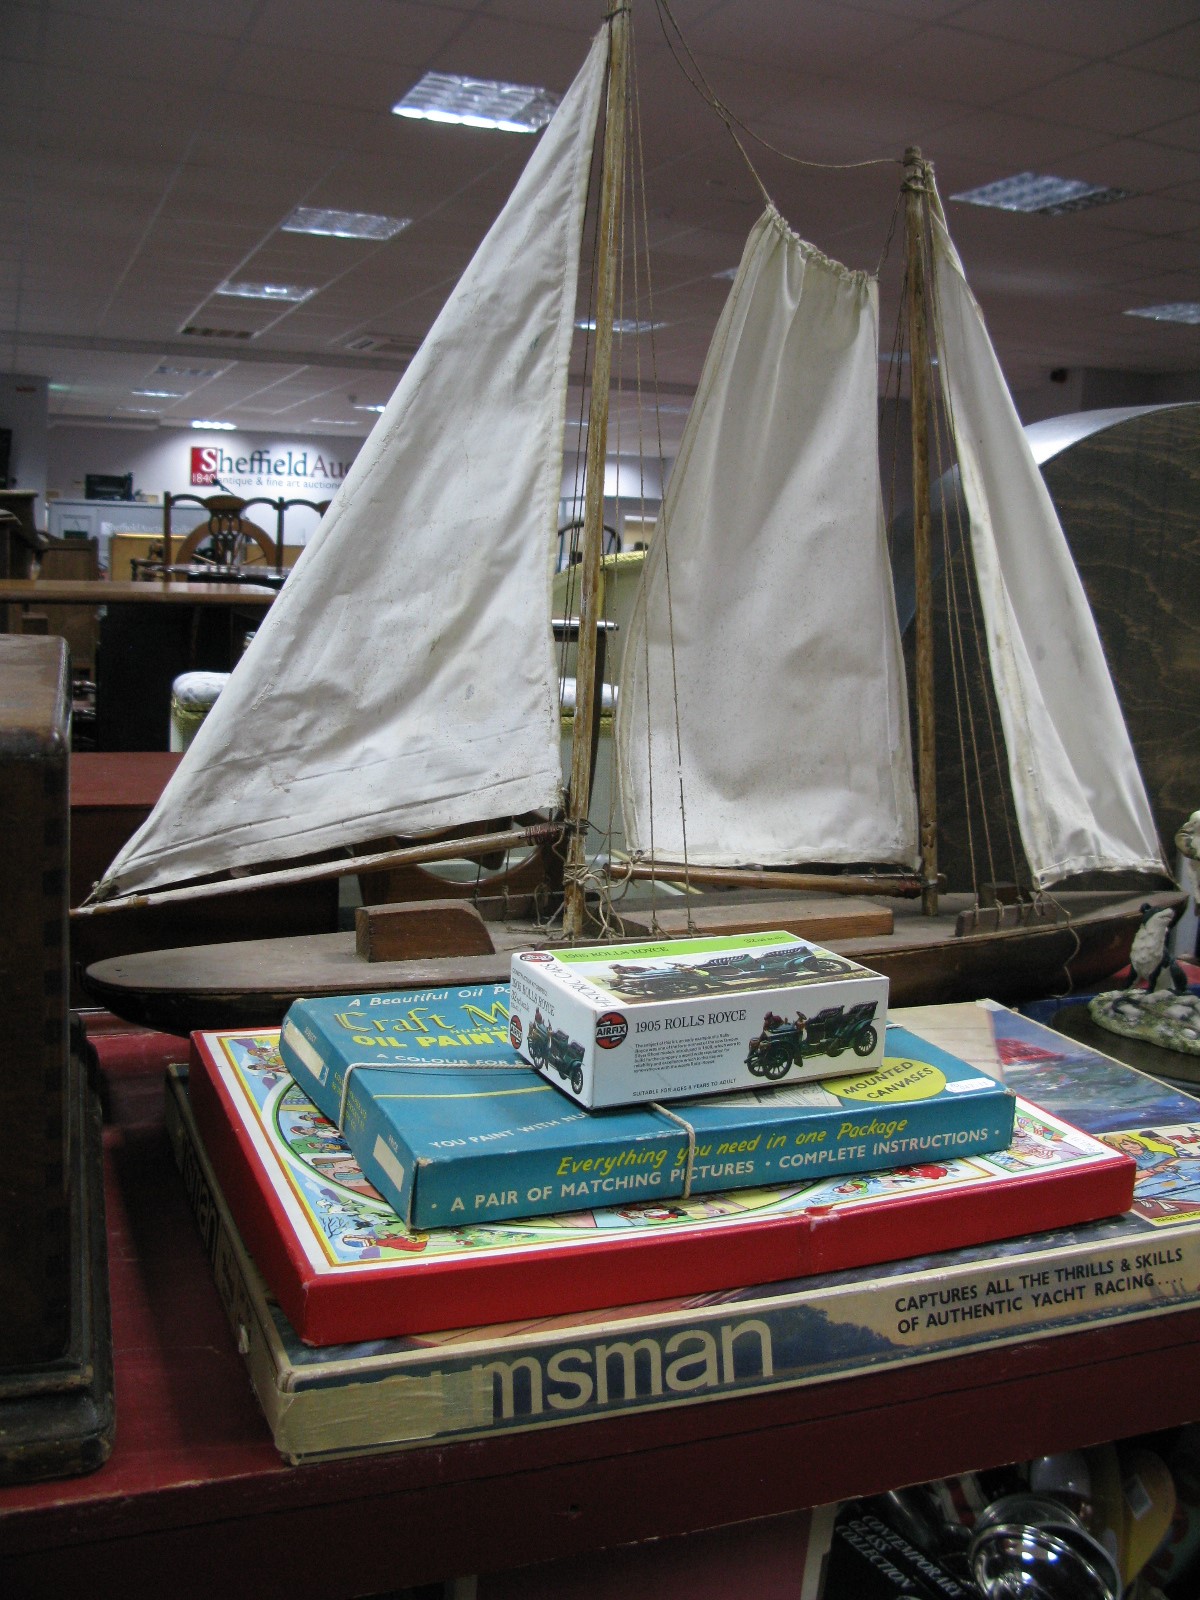 A Child's Wooden Sailing Boat, canvas sails, length 93cm, Triang 'Helmsman' game, Airfix 1905